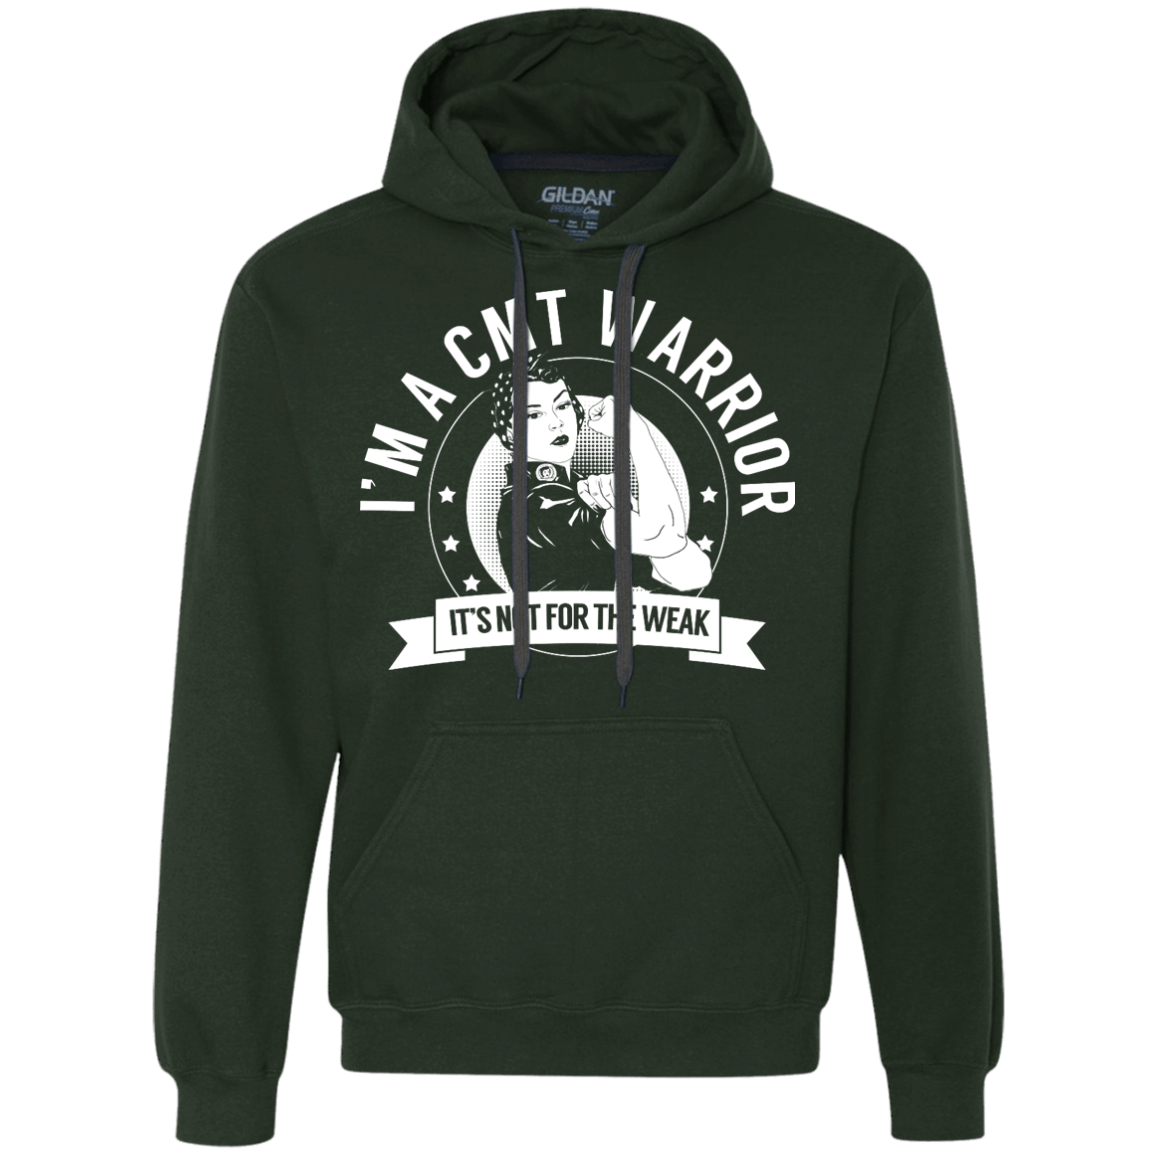 Charcot-Marie-Tooth Disease- CMT Warrior Not For The Weak Pullover Hoodie - The Unchargeables